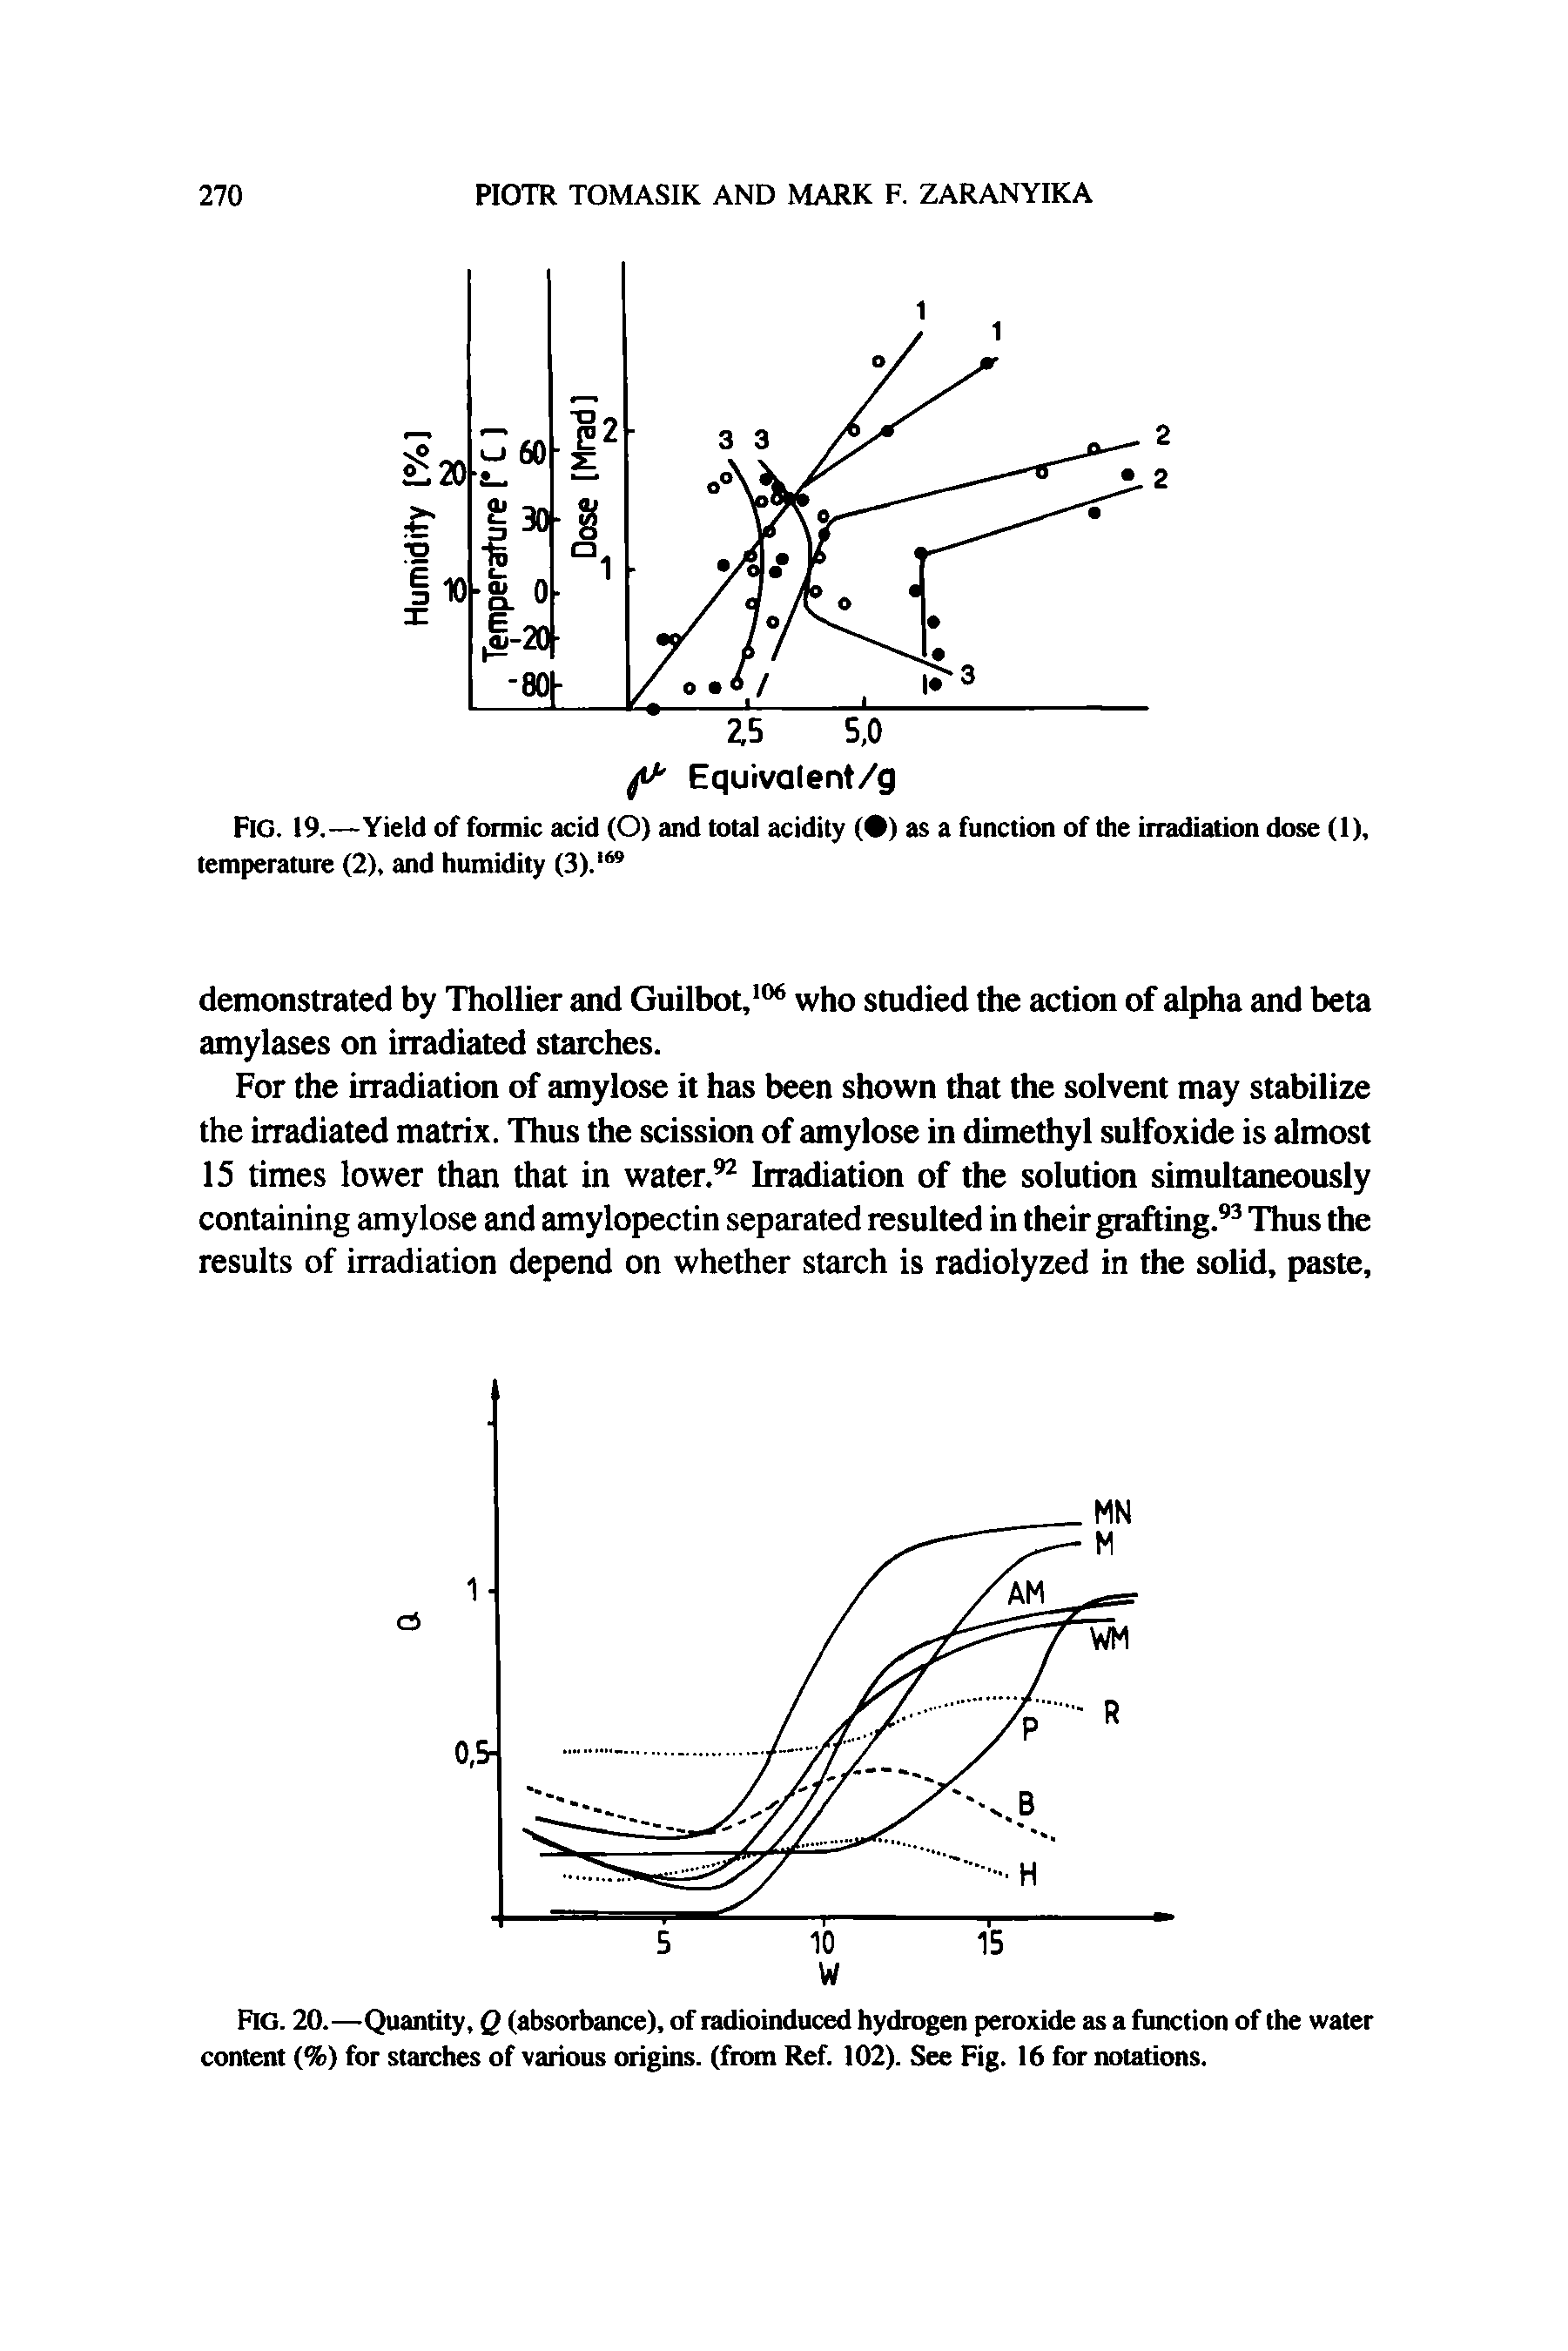 Fig. 20.—Quantity, Q (absorbance), of radioinduced hydrogen peroxide as a function of the water content (%) for starches of various origins, (from Ref. 102). See Fig. 16 for notations.